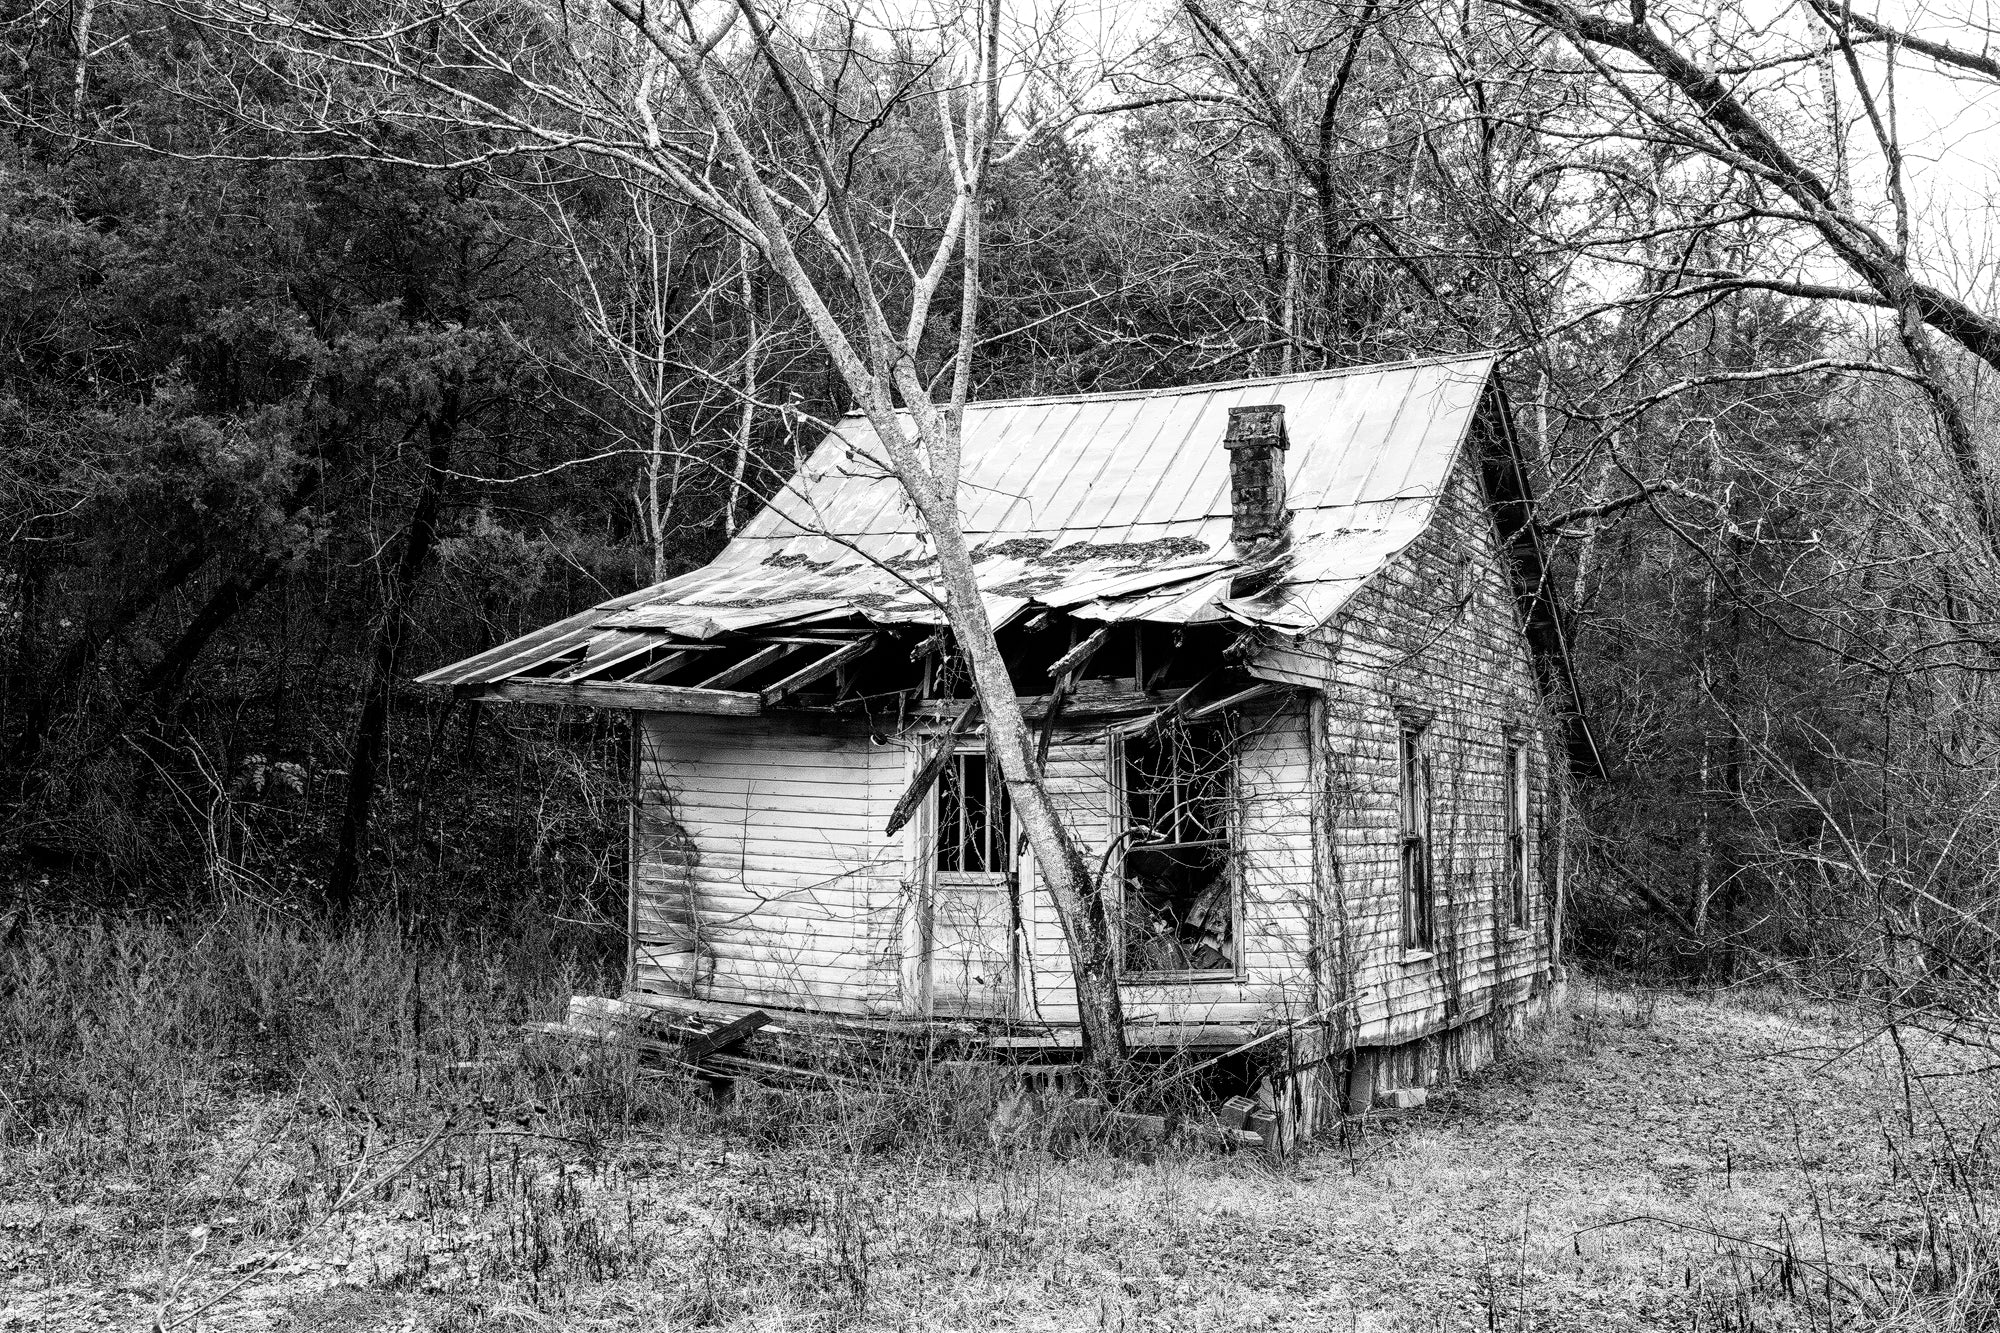 Black and white photograph of an abandoned rural farm house in the American South